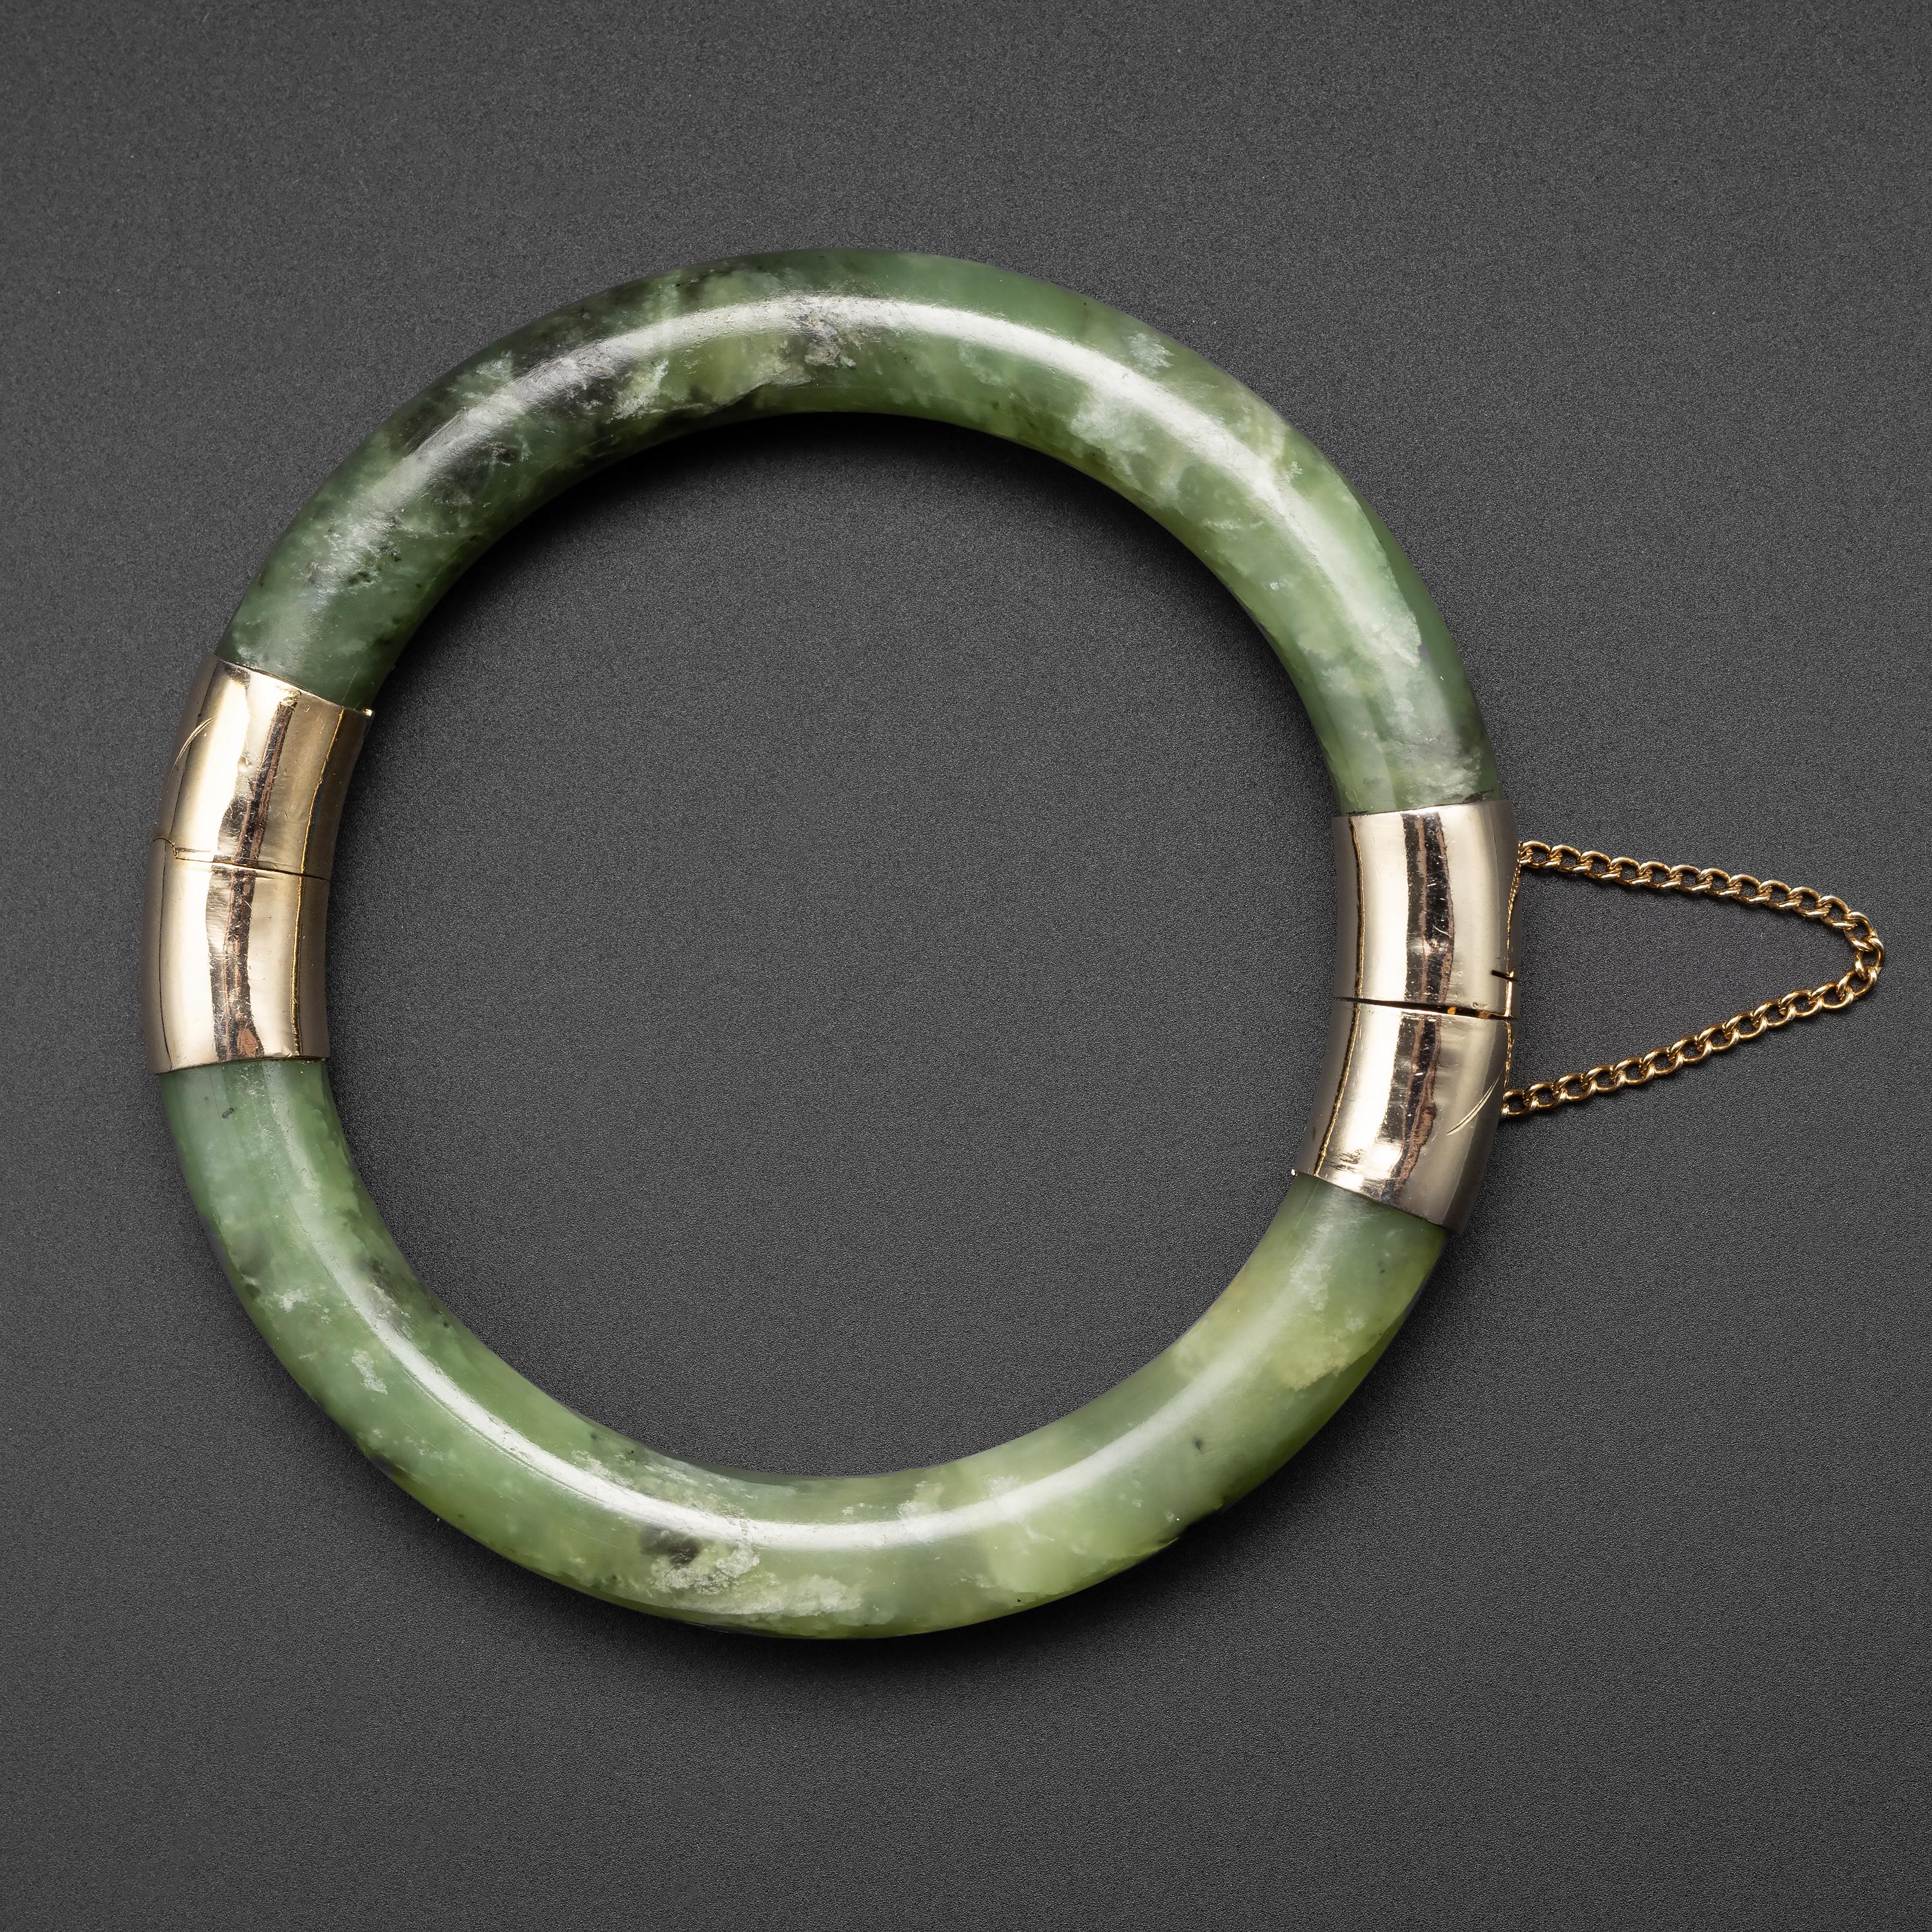 This Midcentury (circa 1970s) nephrite jade bangle is highly translucent and displays beautiful natural stone grain. The interior diameter is approximately 61.51mm, but because the bangle is hinged, it will fit larger wrists. A hinged bangle is